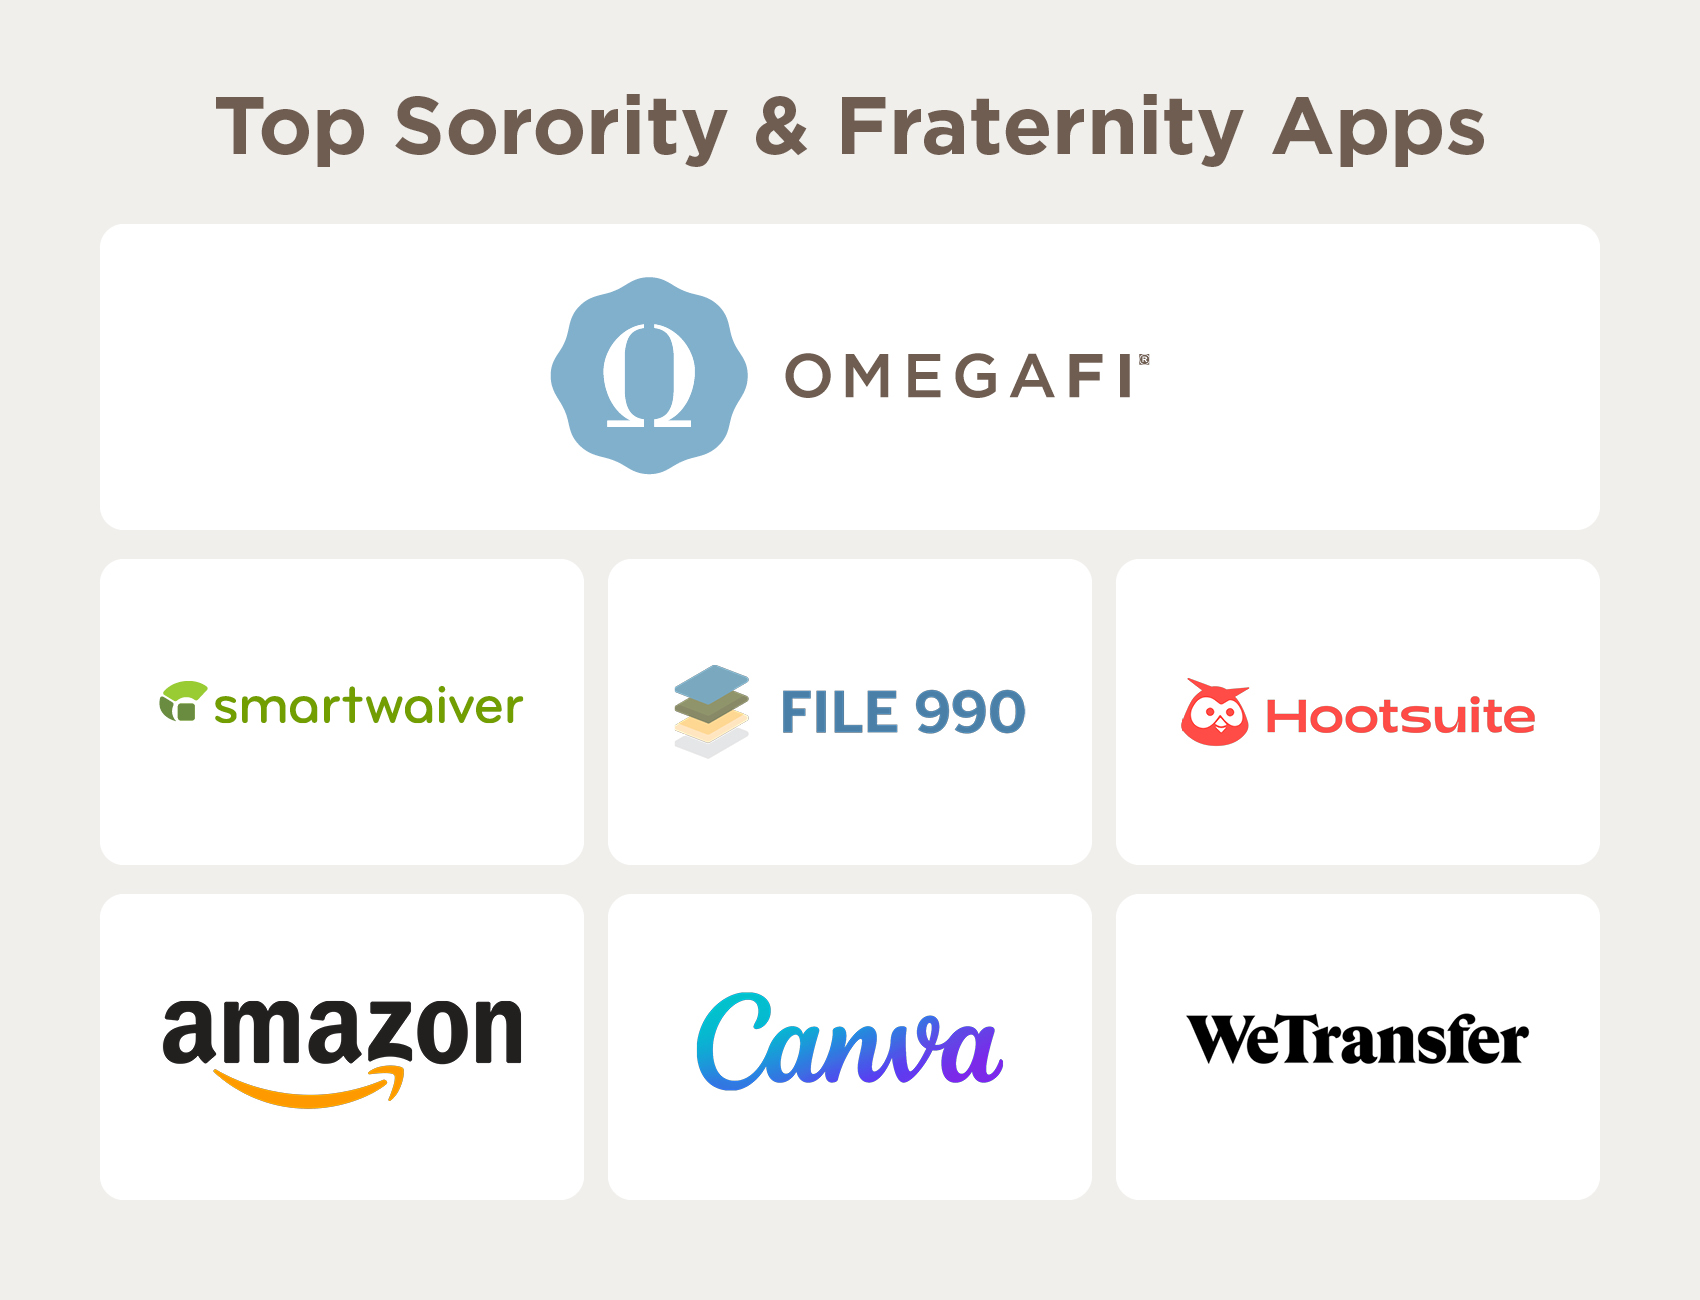 A graphic showing the top sorority and fraternity apps as mentioned below.